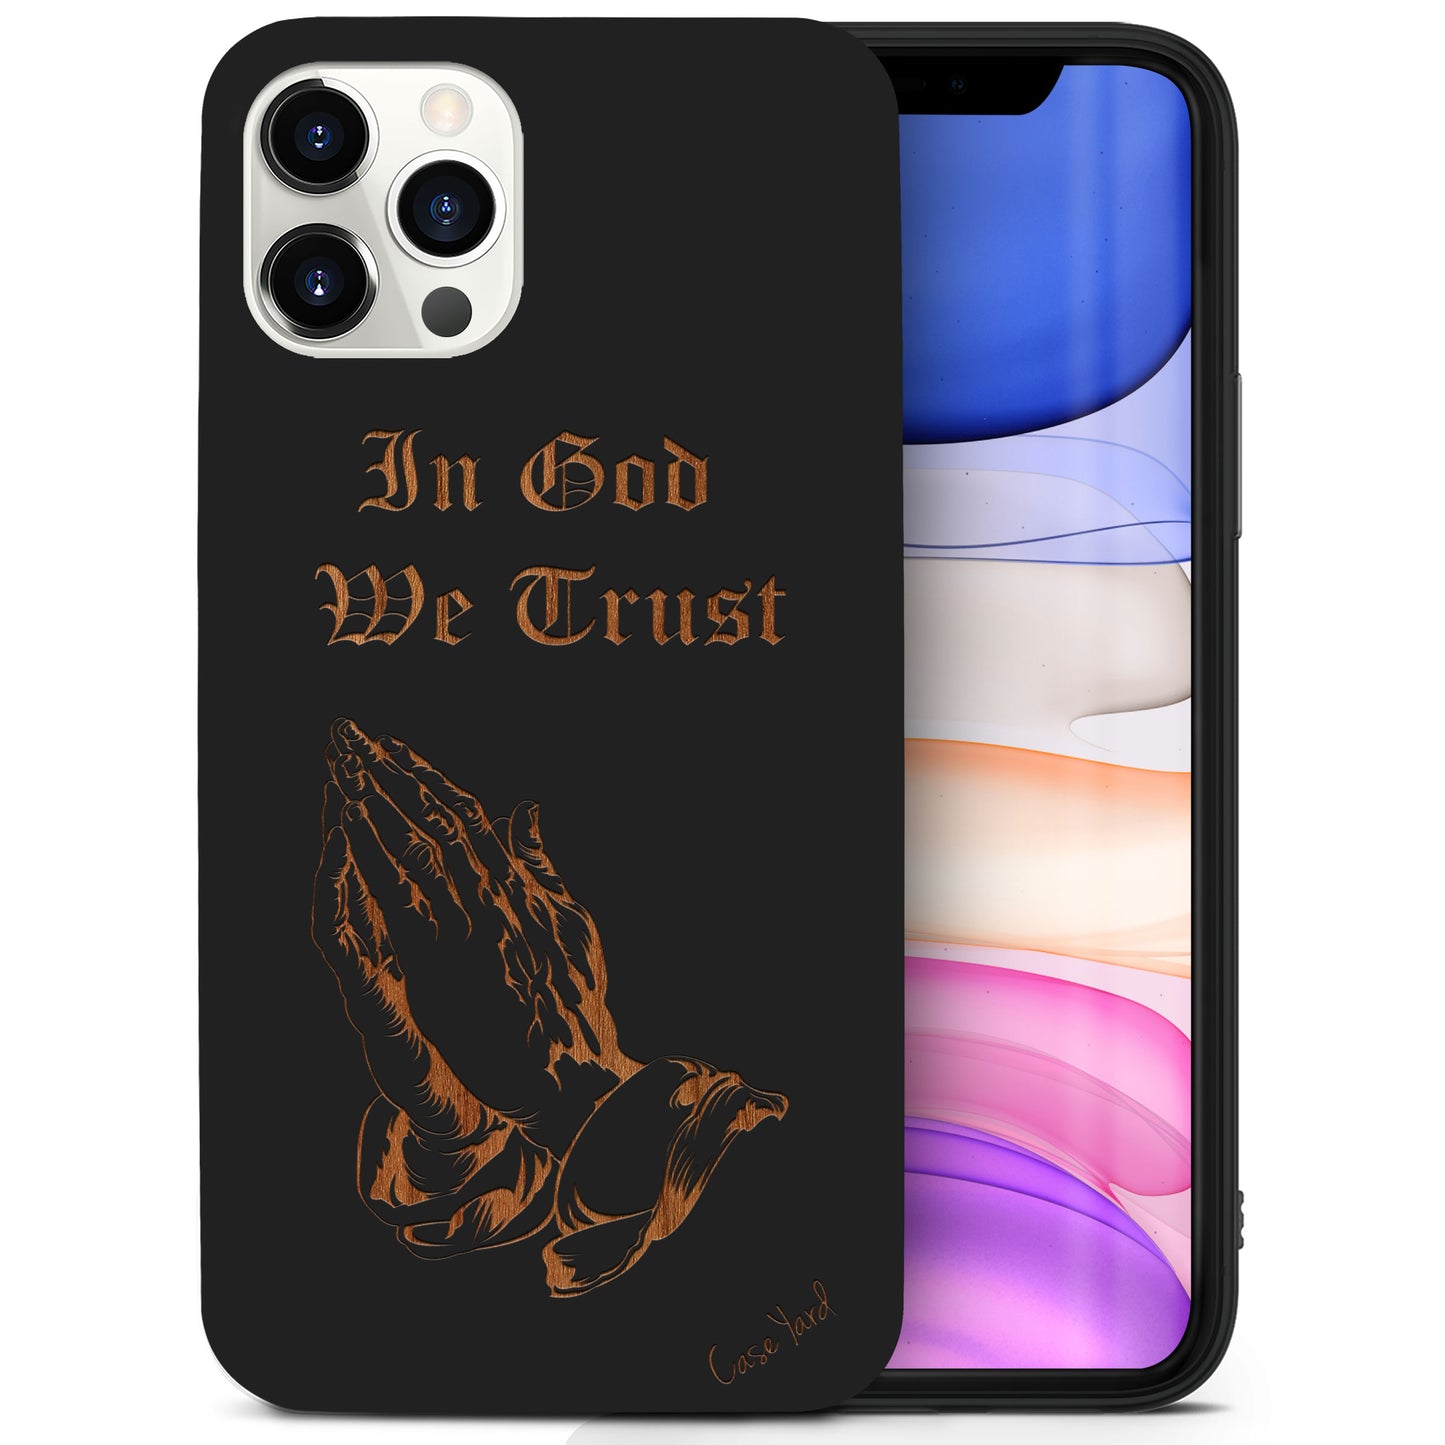 Wooden Cell Phone Case Cover, Laser Engraved case for iPhone & Samsung phone In God We Trust Case Design